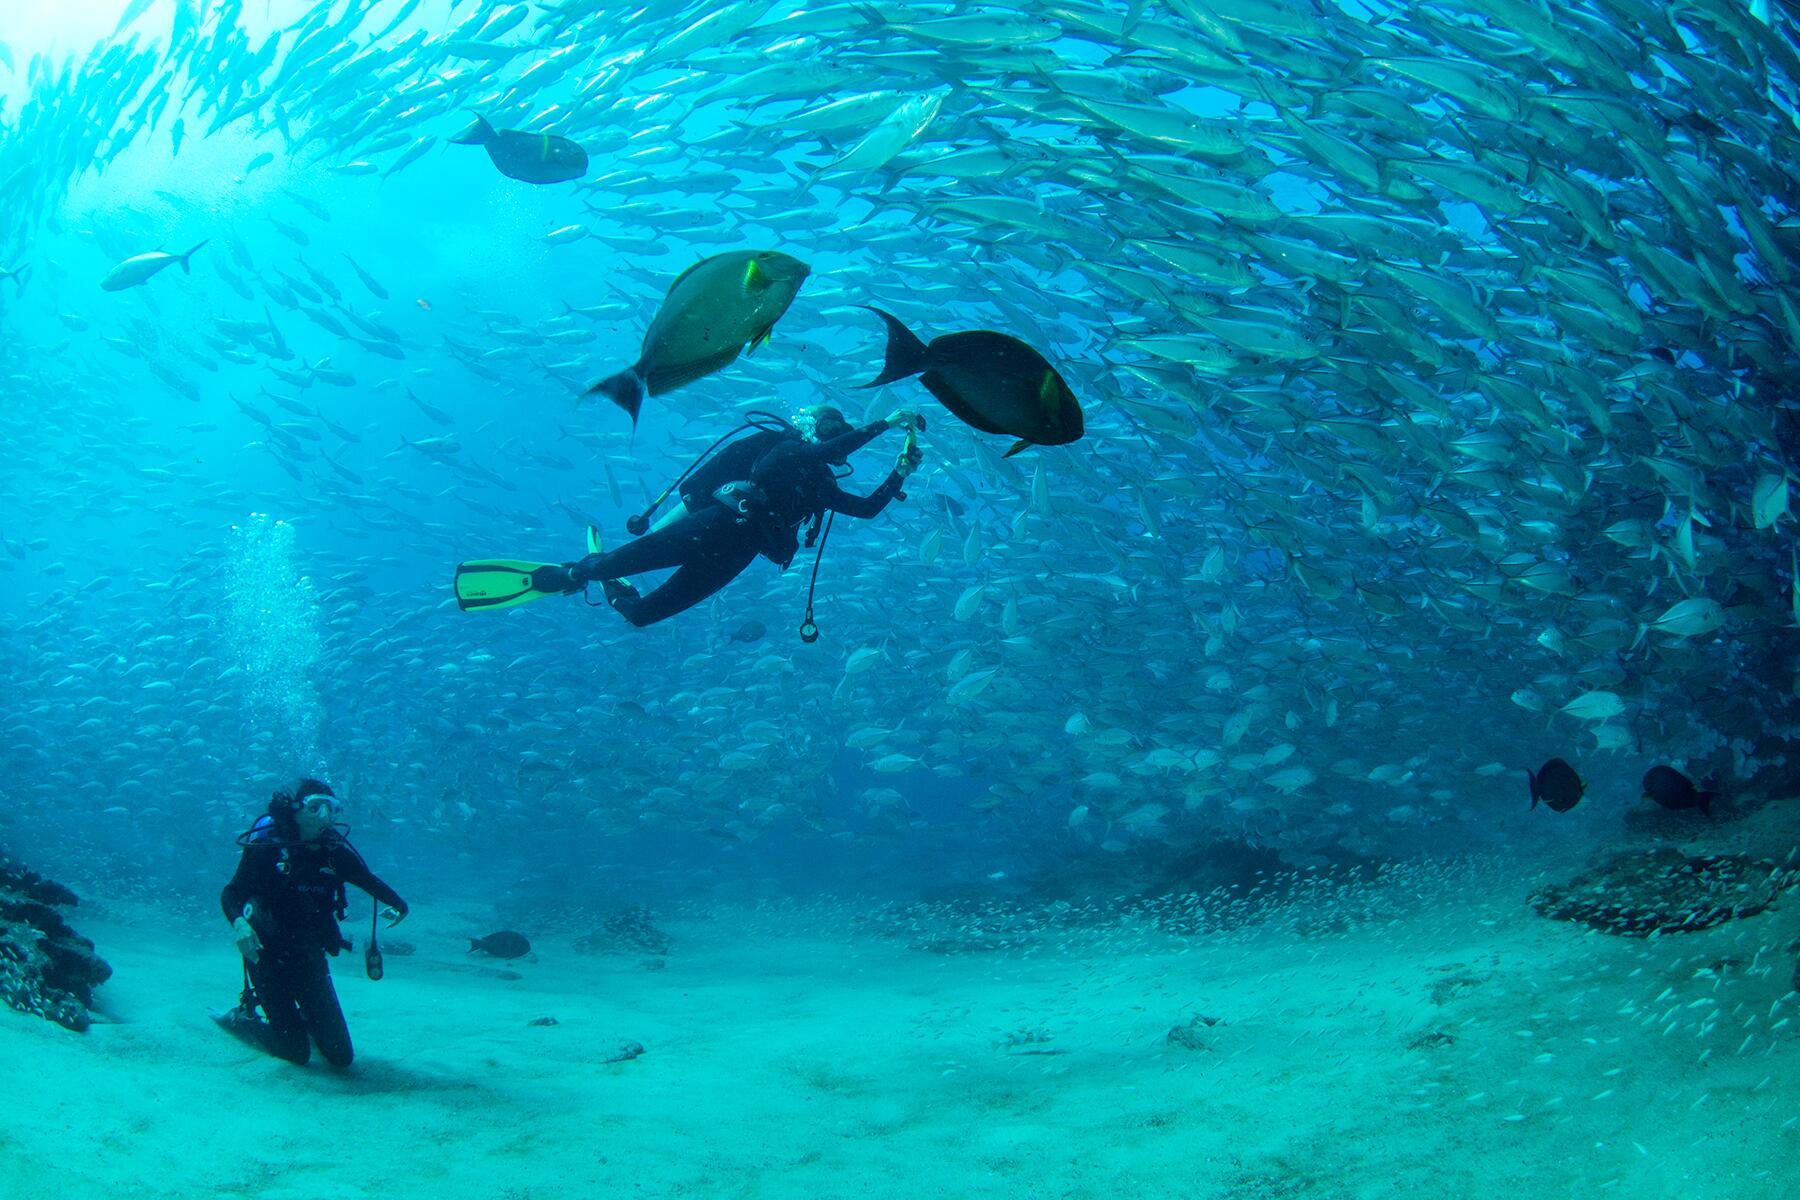 <a href='https://www.fodors.com/world/mexico-and-central-america/mexico/los-cabos/experiences/news/photos/best-outdoor-activities-and-things-to-do-in-los-cabos#'>From &quot;The 10 Best Outdoor Activities in Los Cabos: Diving at Cabo Pulmo&quot;</a>